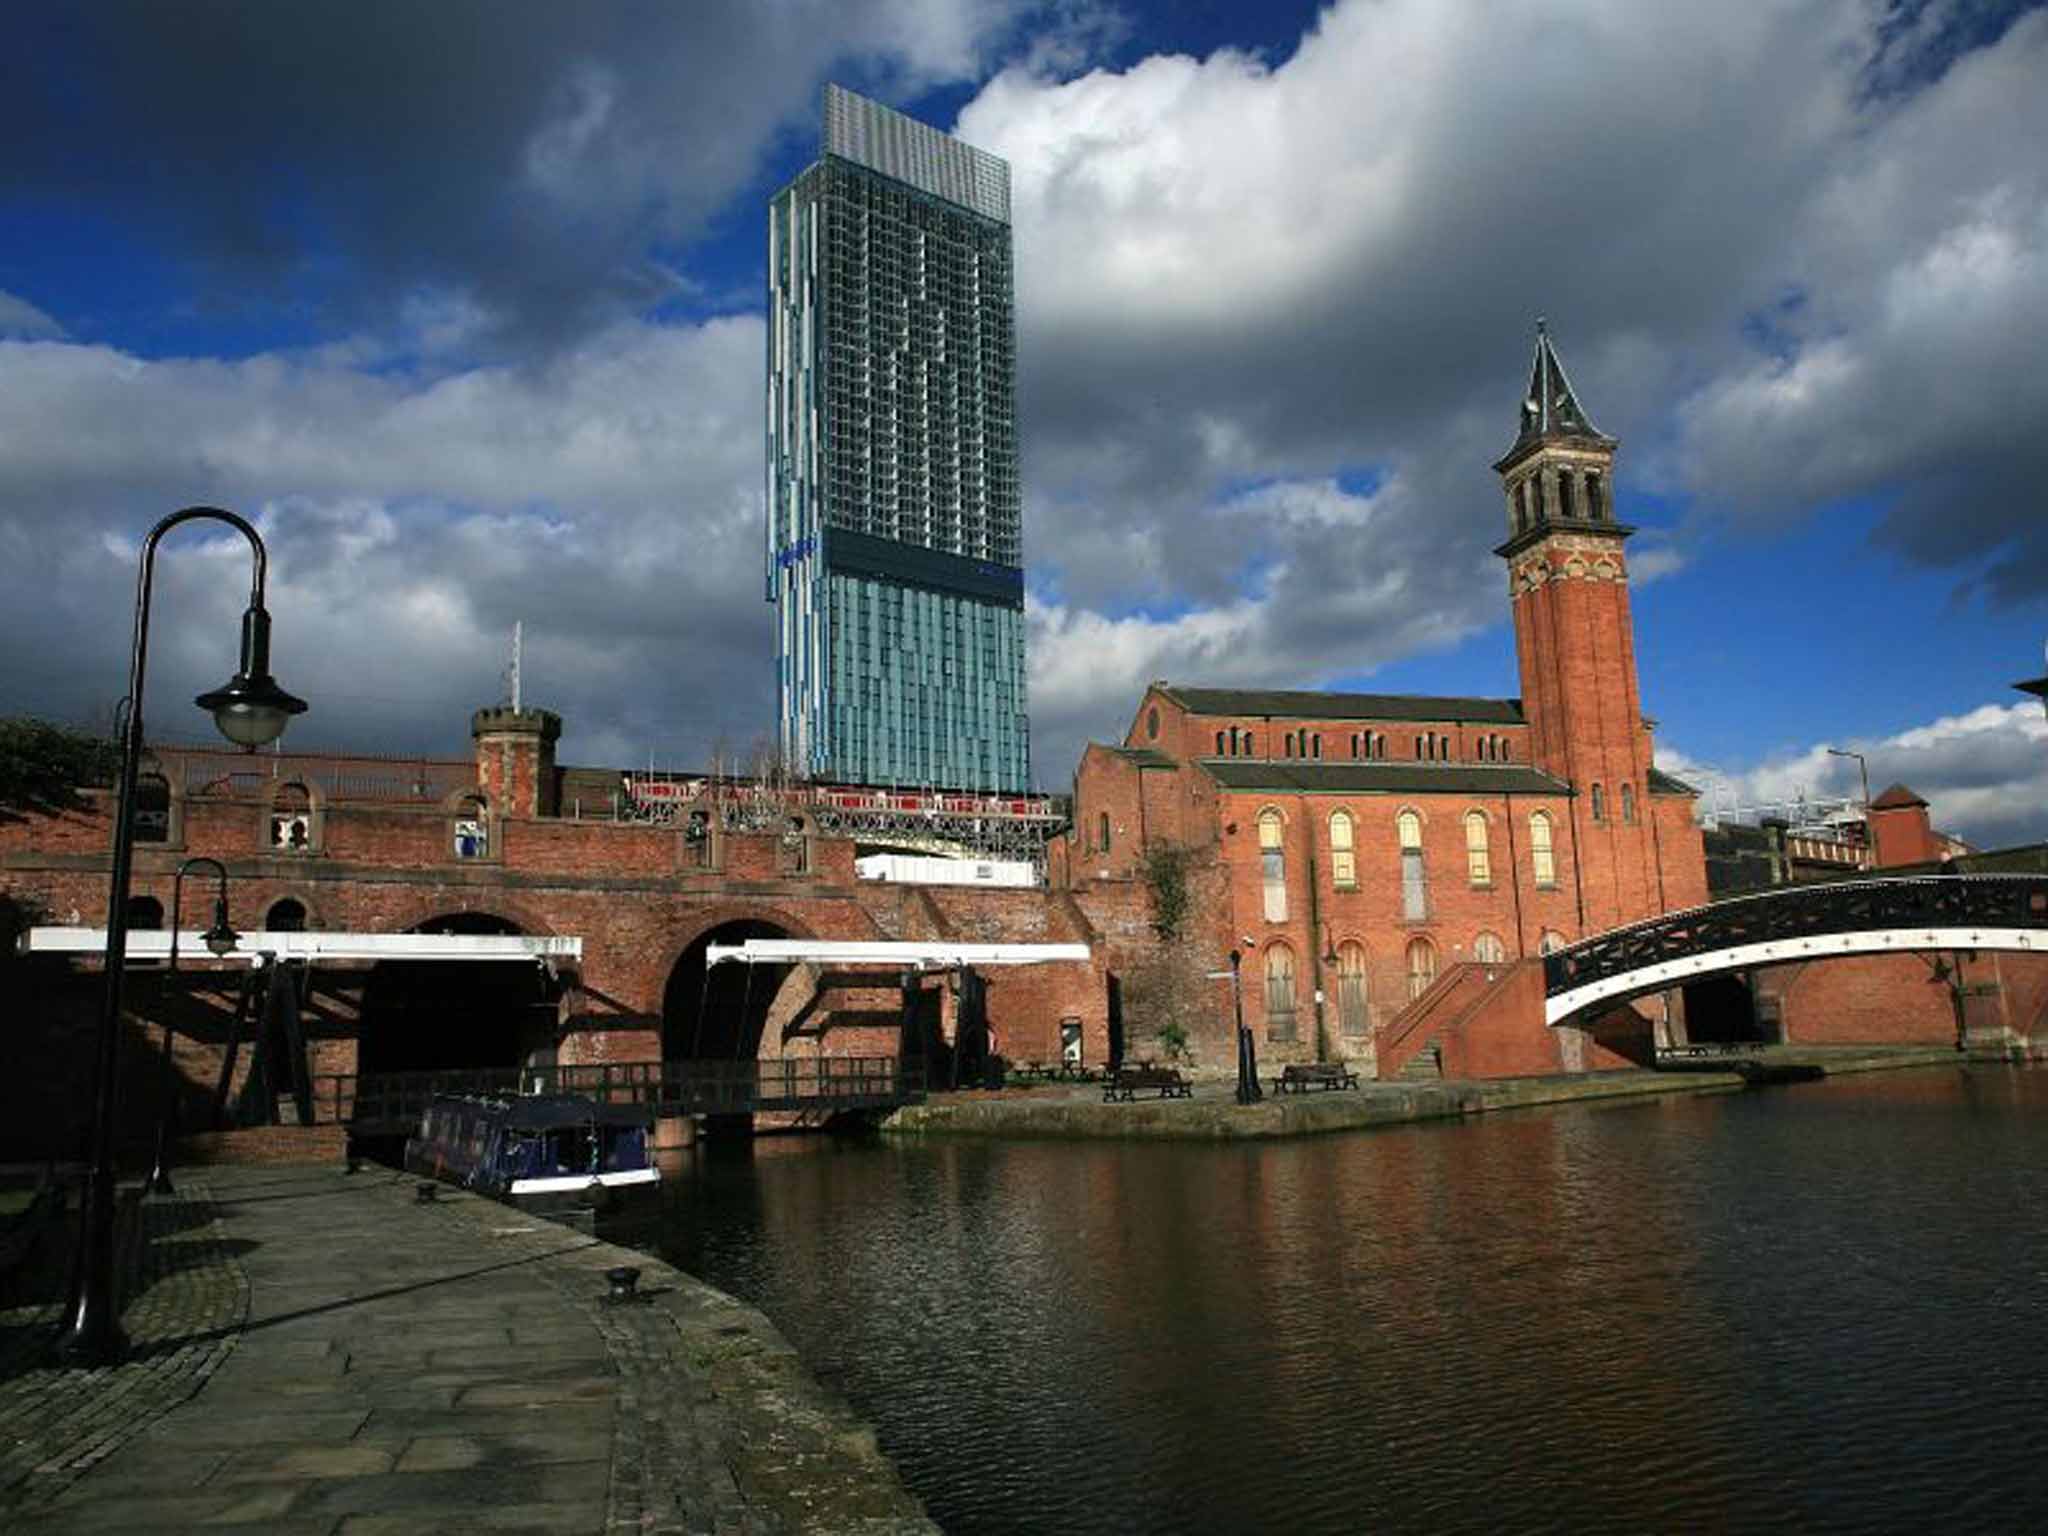 Manchester, where a man asked to be deported from last week